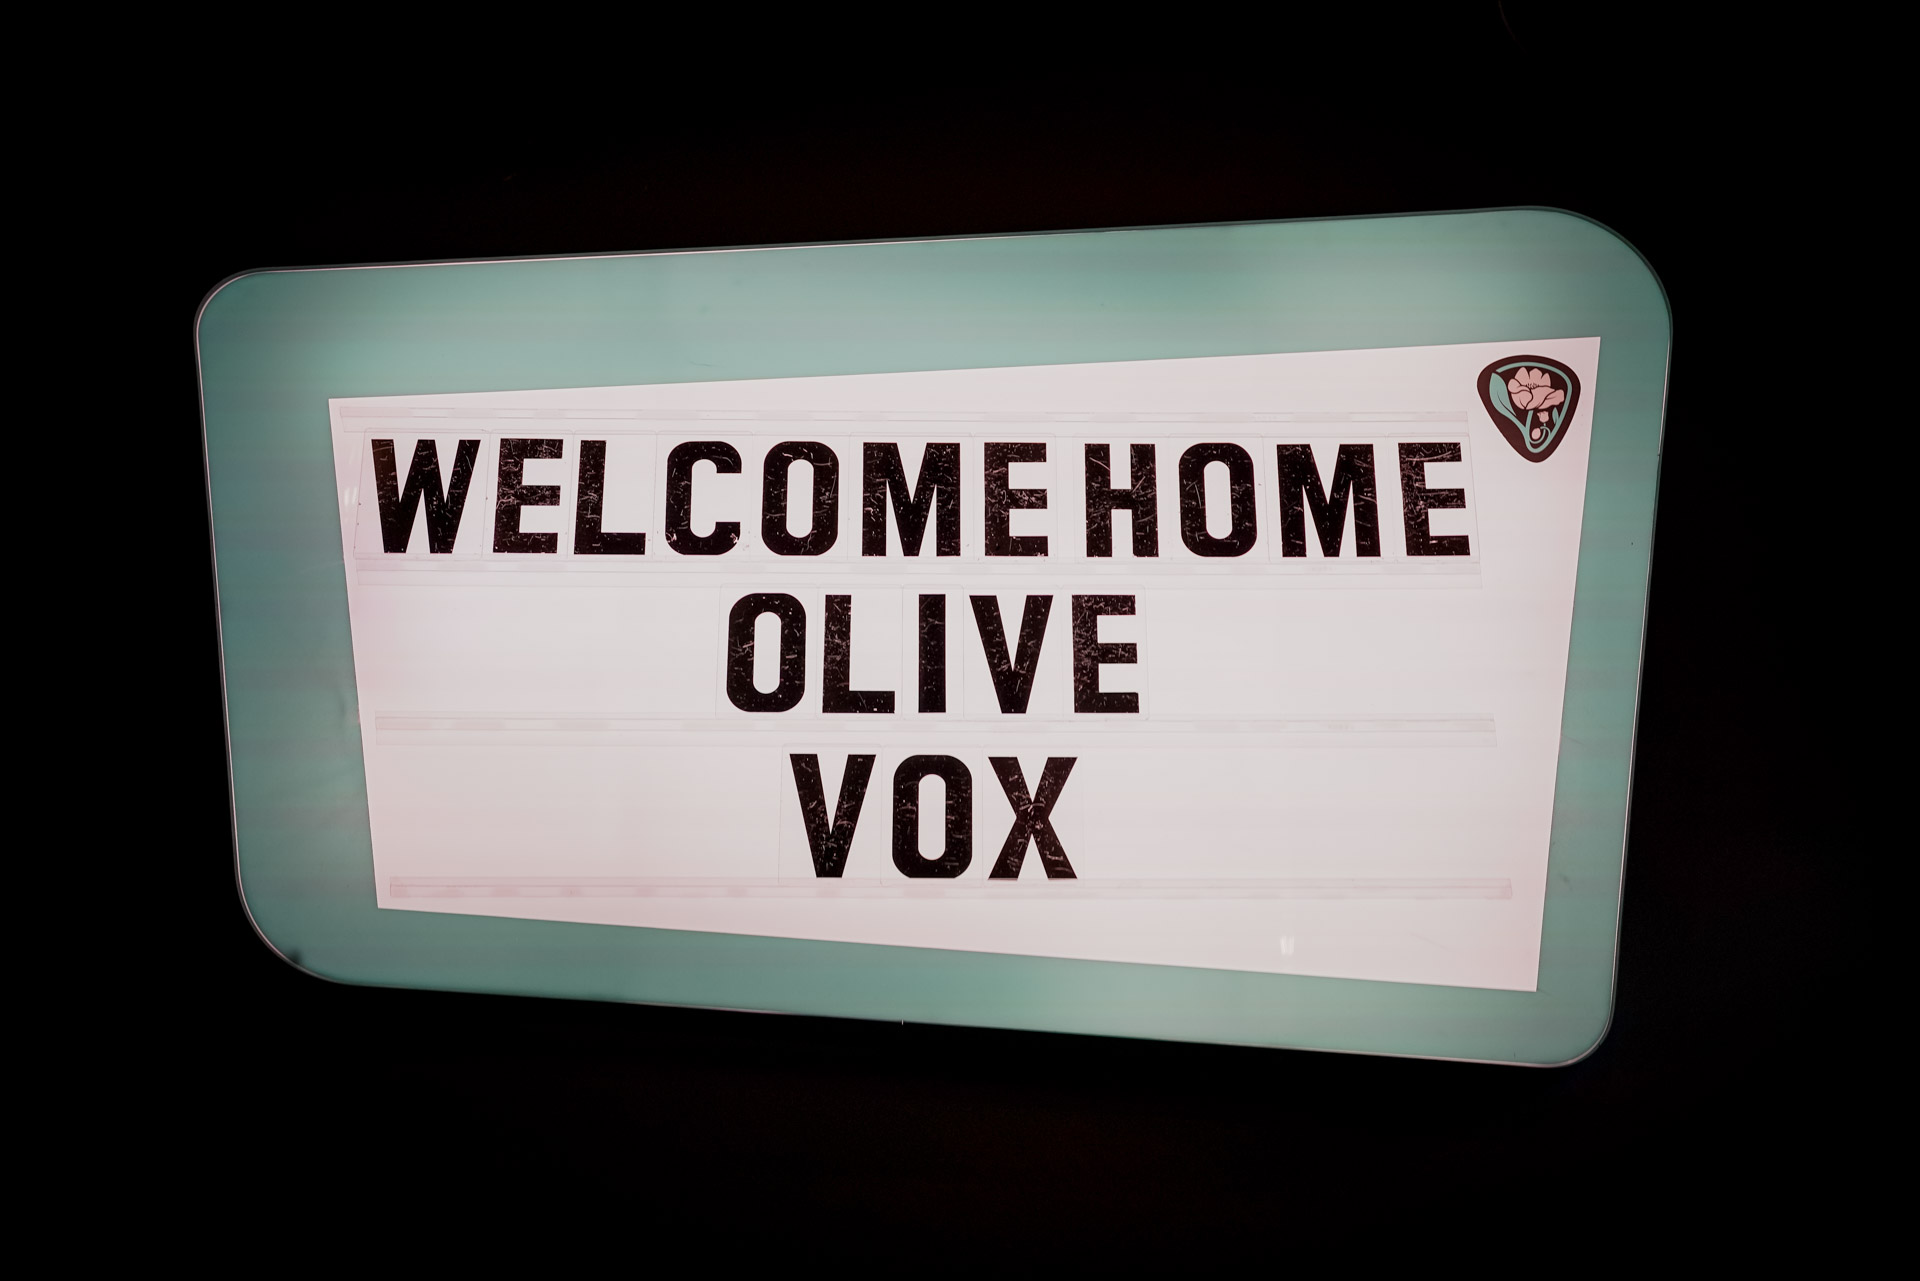 A marquee that says "WELCOME HOME OLIVE VOX"